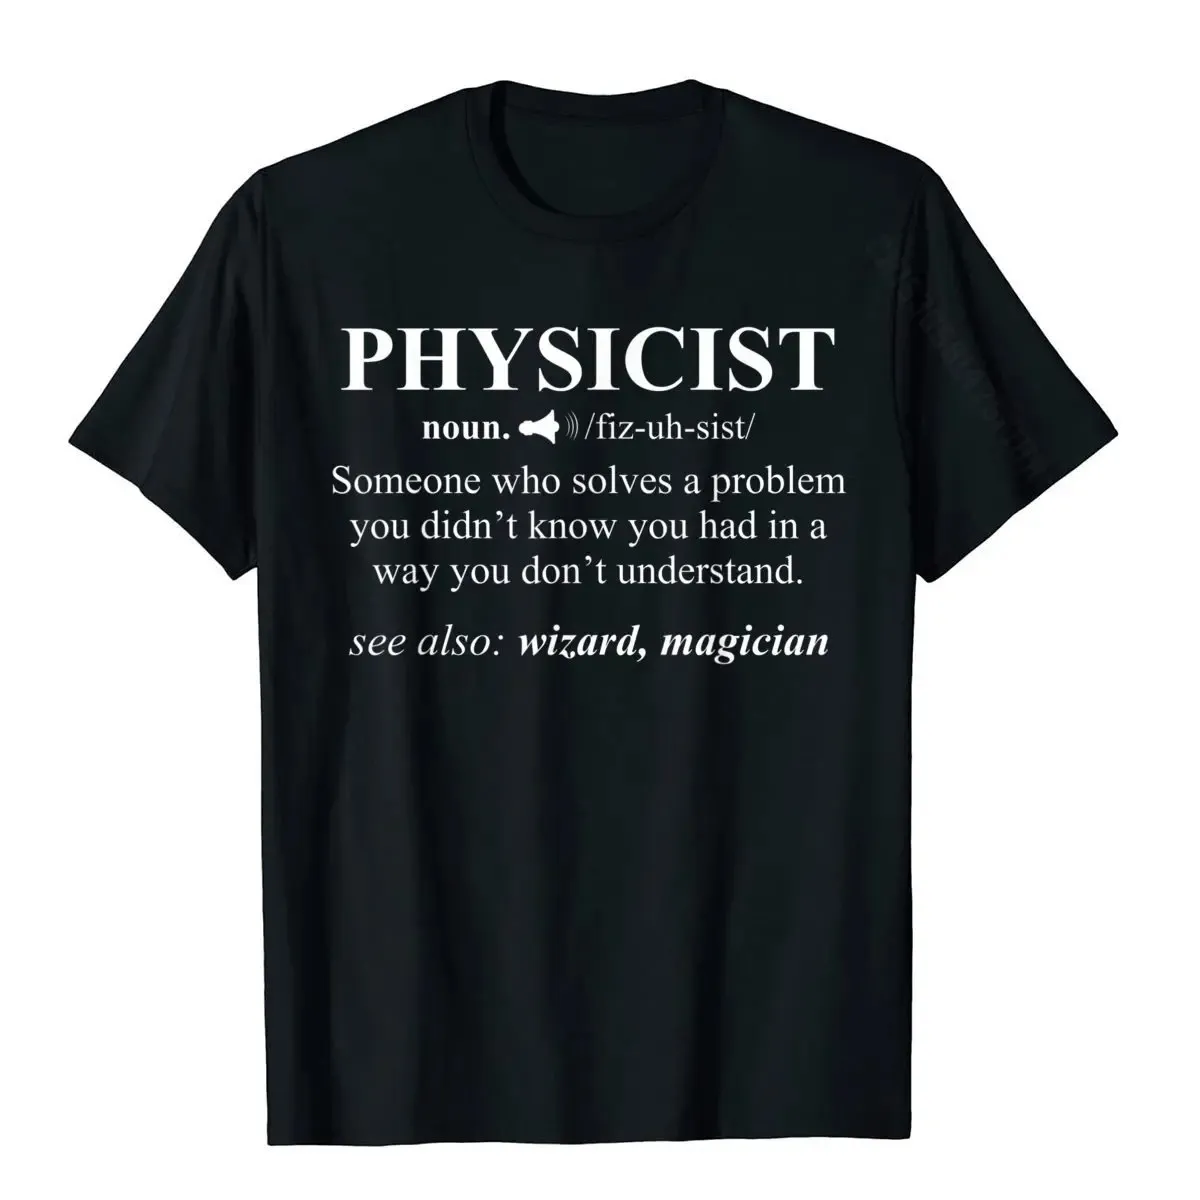 Slim Fit O Neck Tshirts Summer/Fall T Shirt Short Sleeve Designer Pure Cotton Funny T Shirts 3D Printed Men Wholesale Physicist Definition Wizard Scientist Physics T-shirt Funny__1311 black